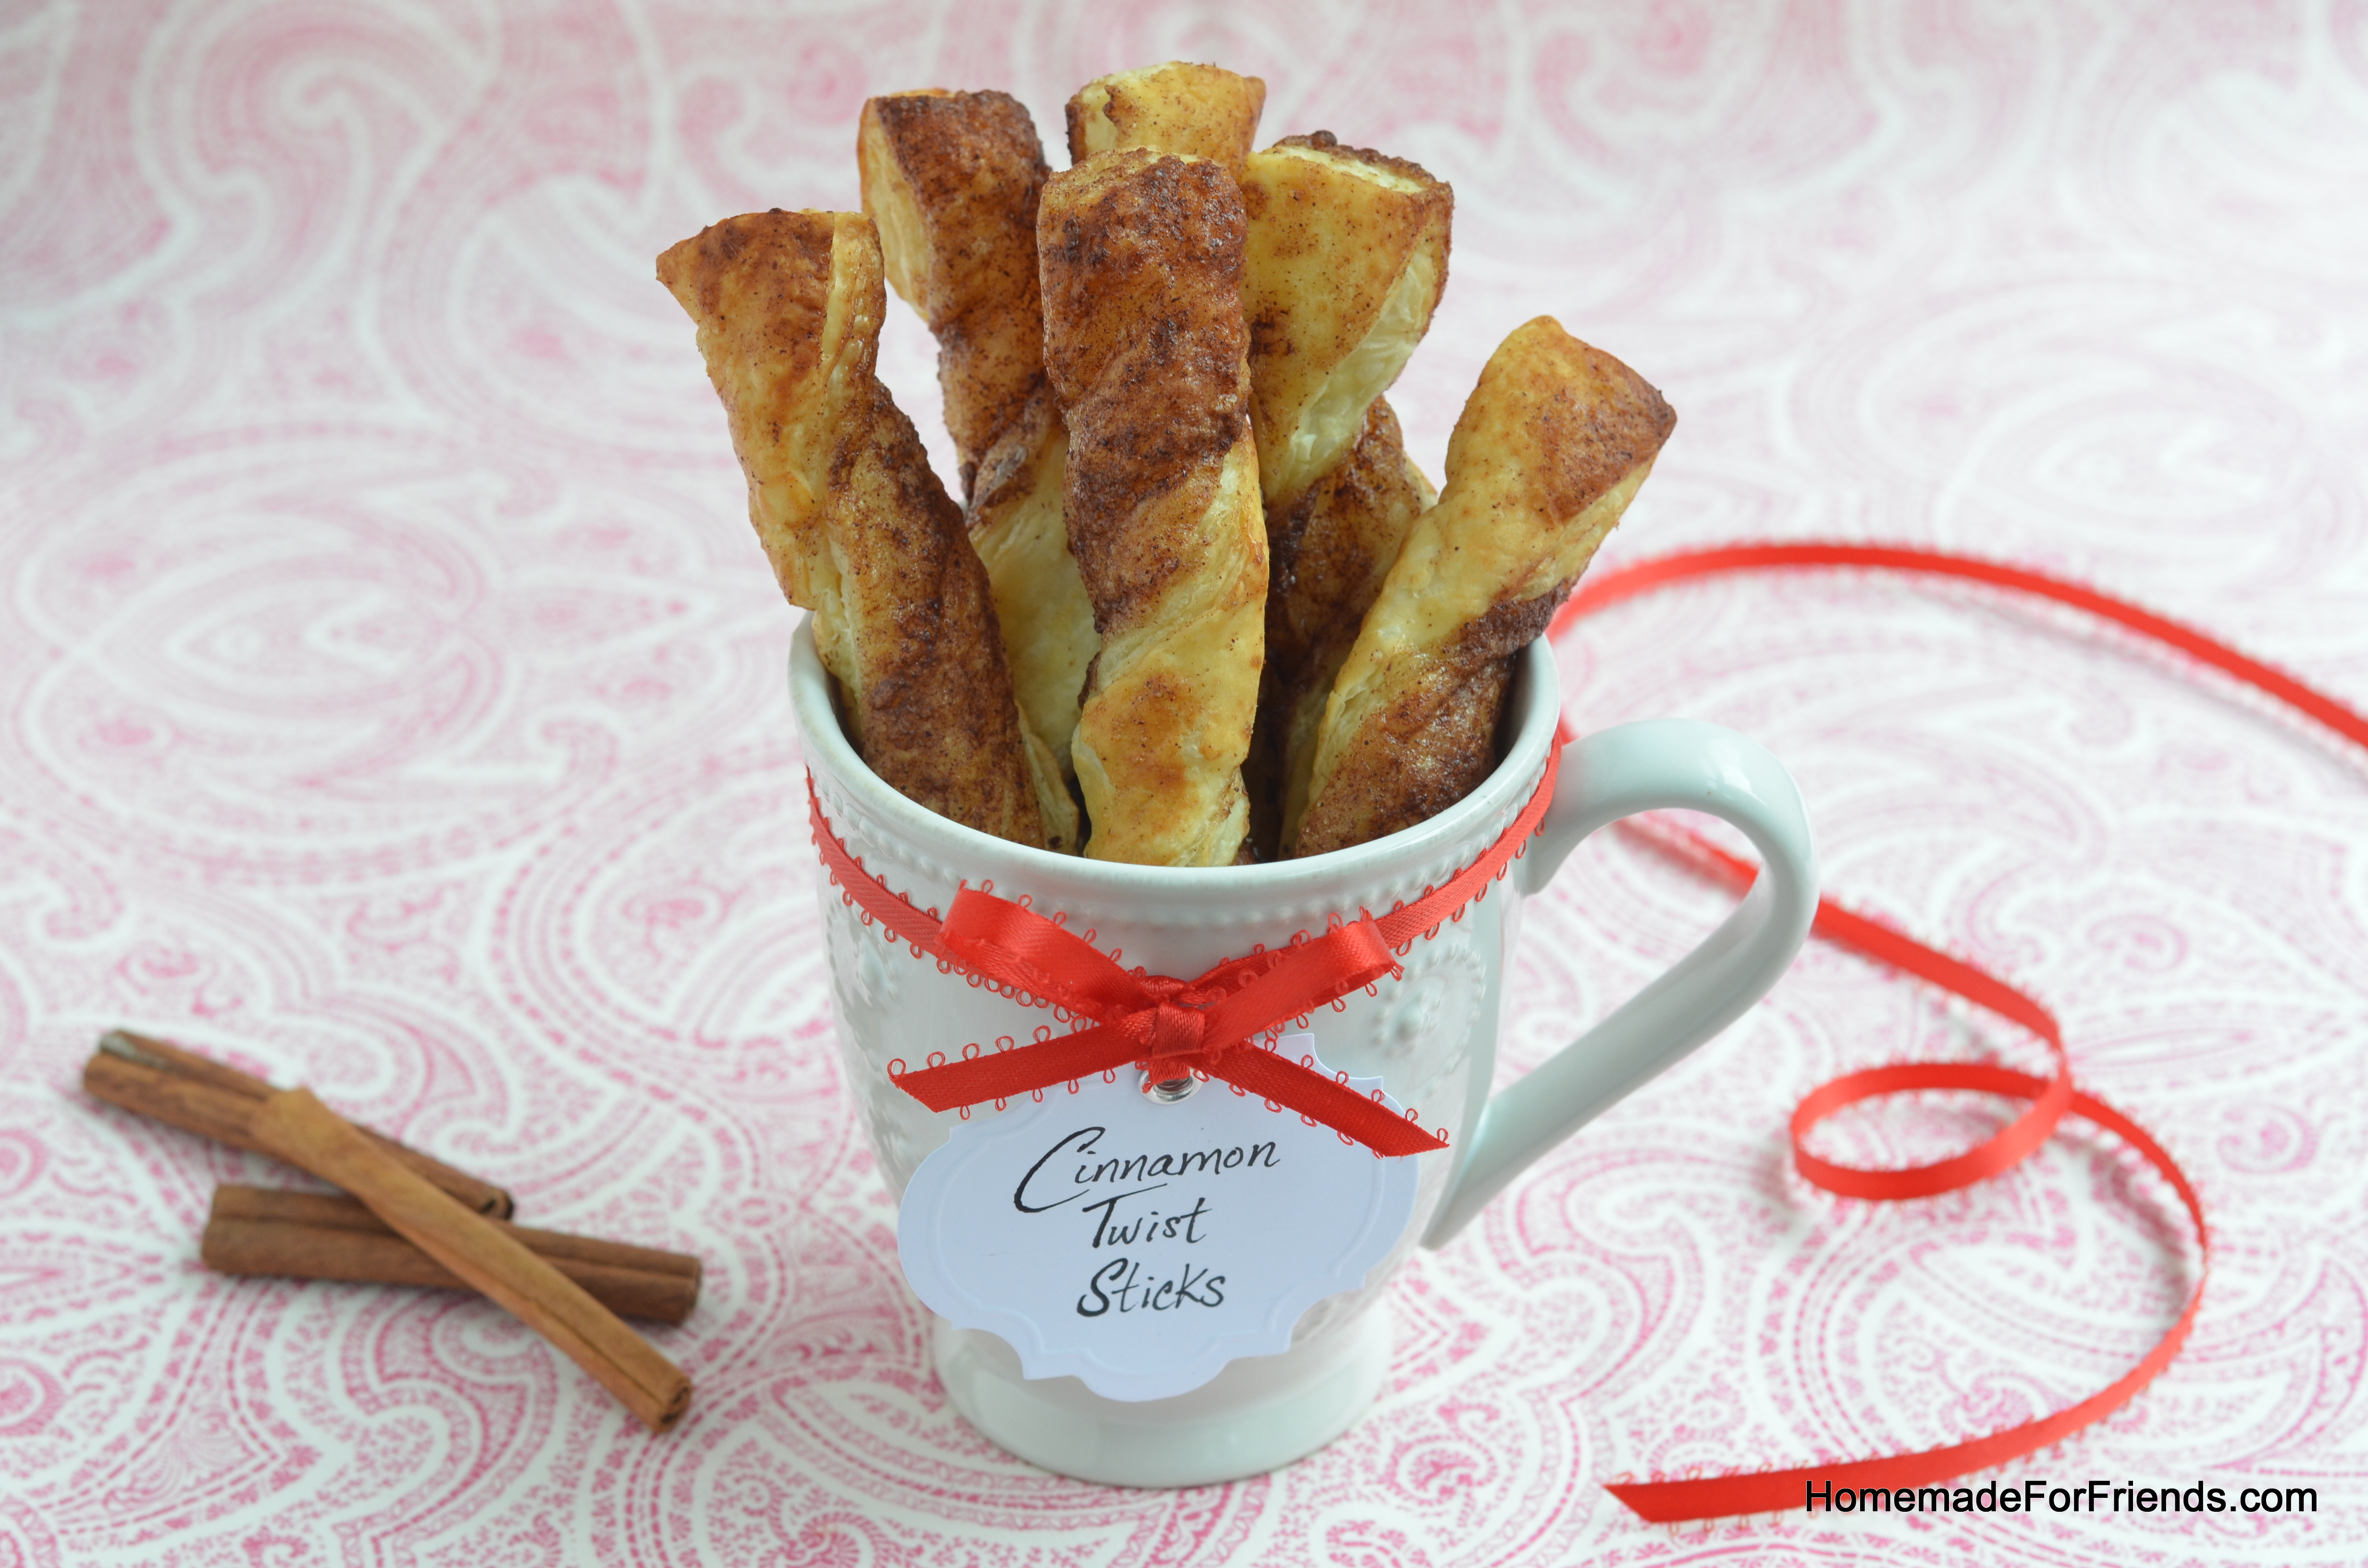 Bring these little cinnamon twist sticks to a holiday brunch and you'll be adored by all.